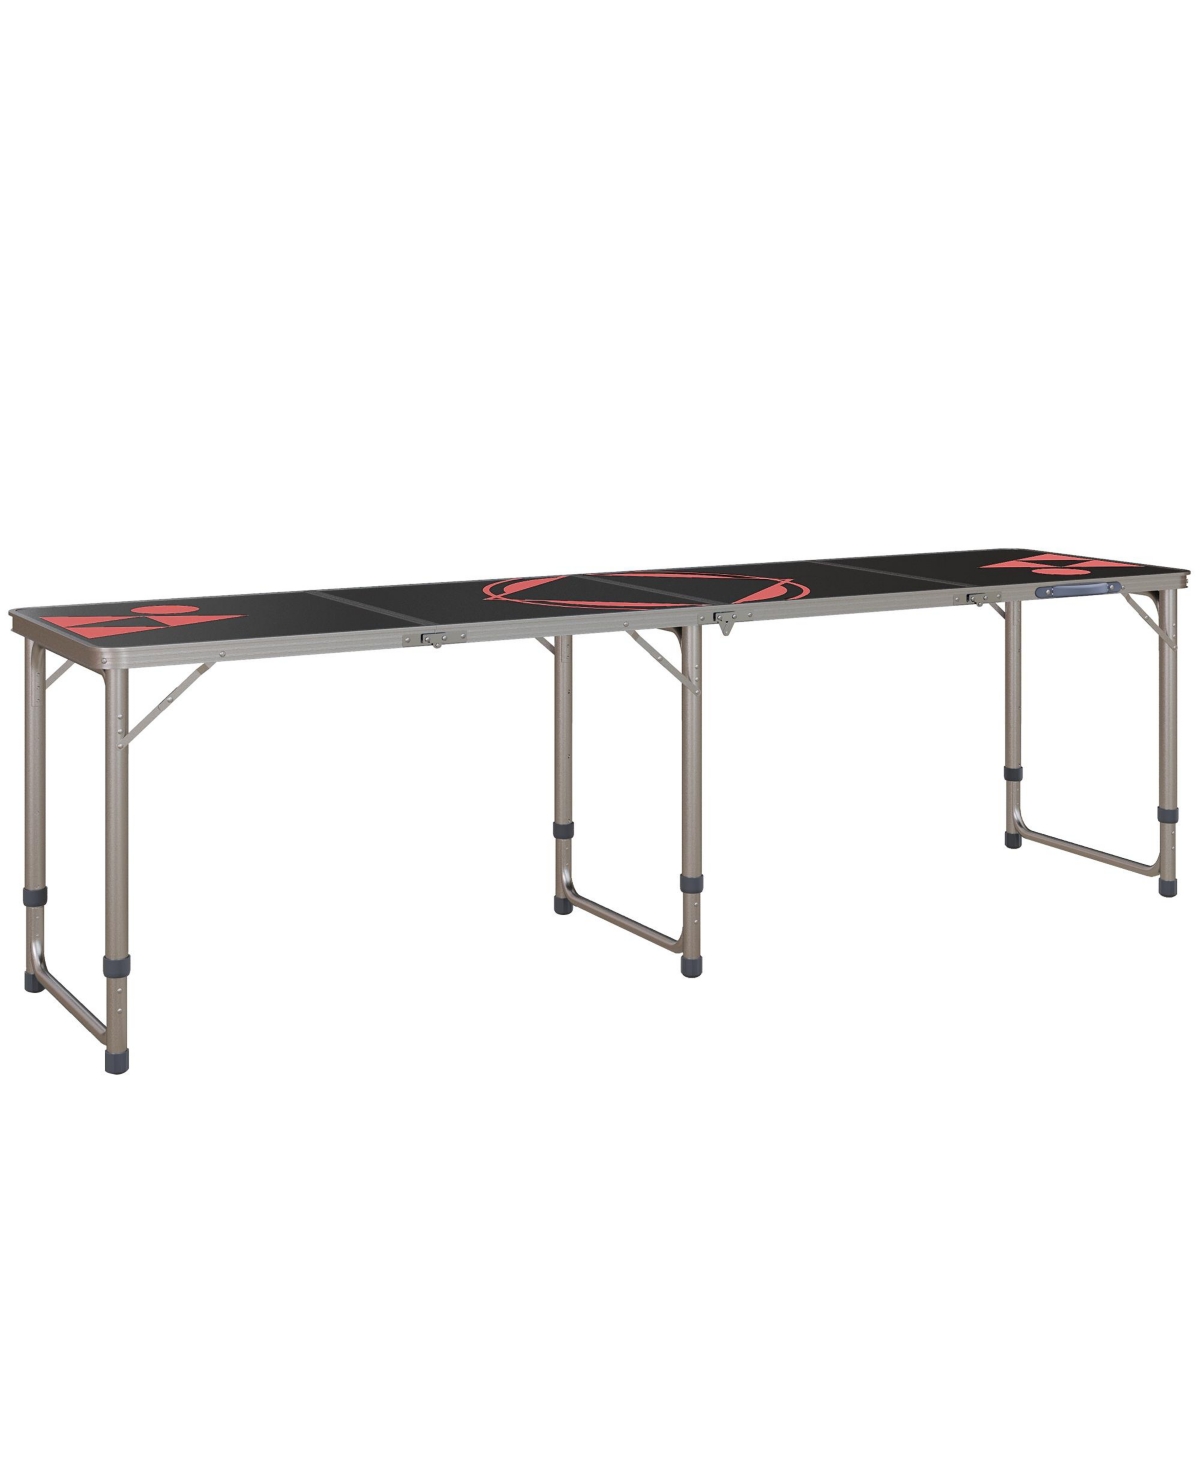 8' Folding Camping Table with Adjustable Legs, Black and Red - Black and red